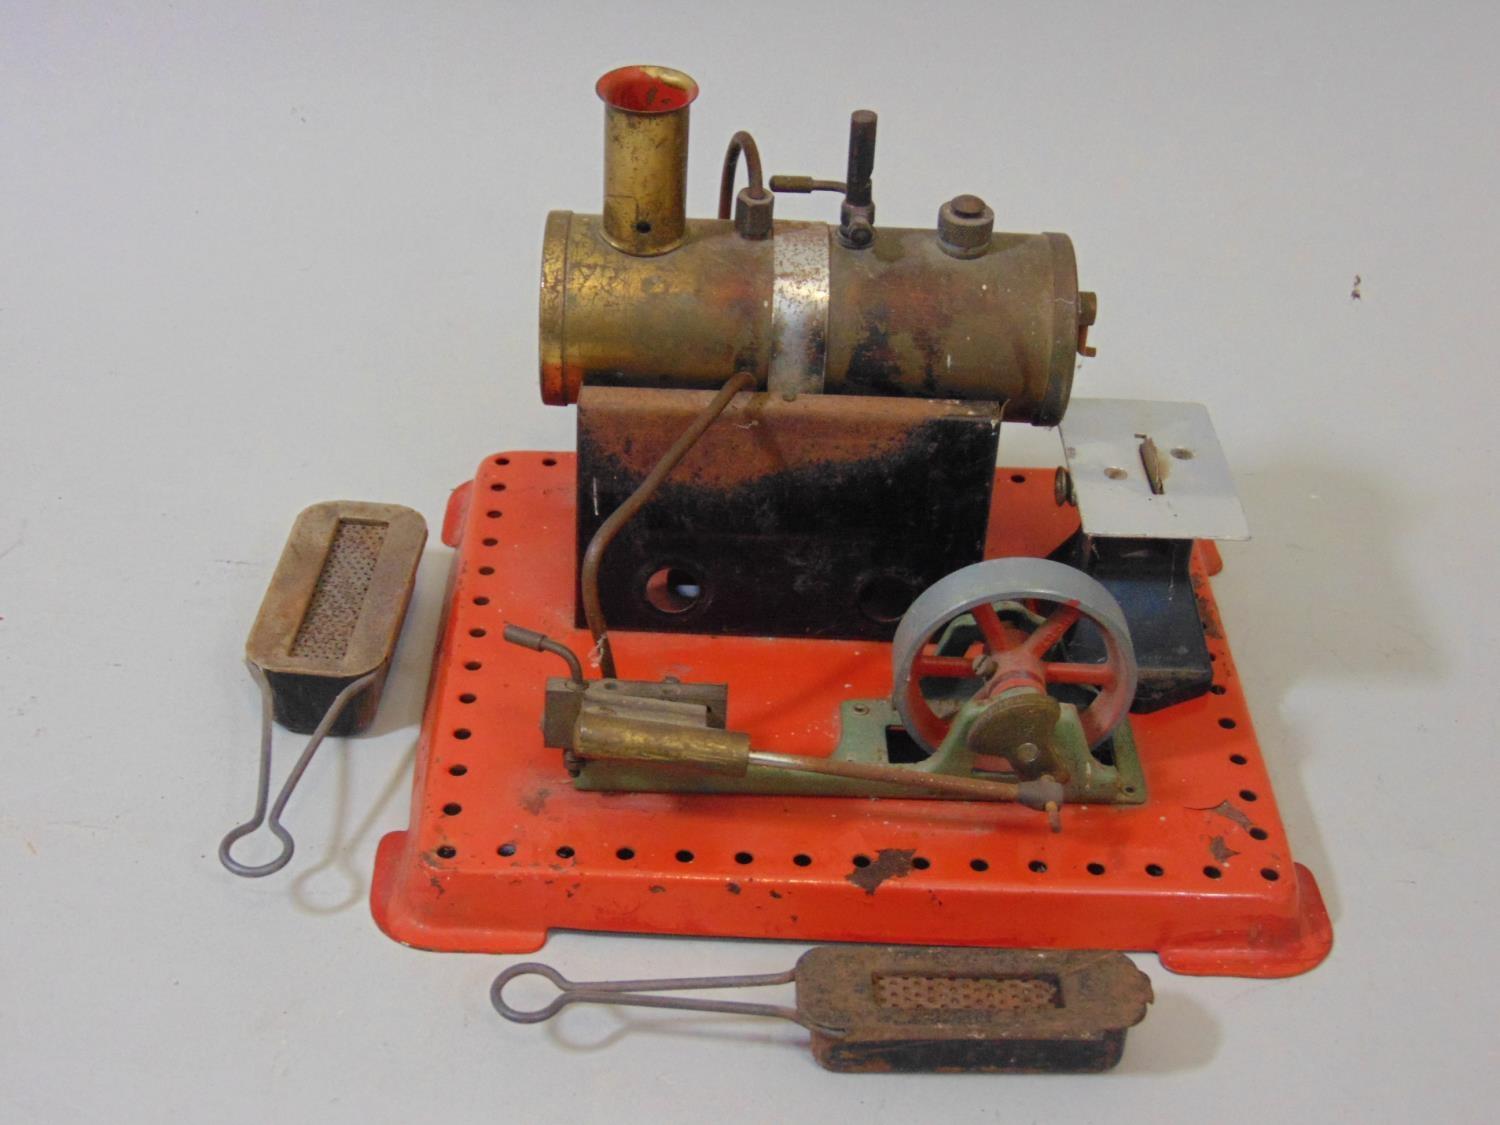 Mamod model steam engine with rotary saw, unboxed - Image 2 of 2